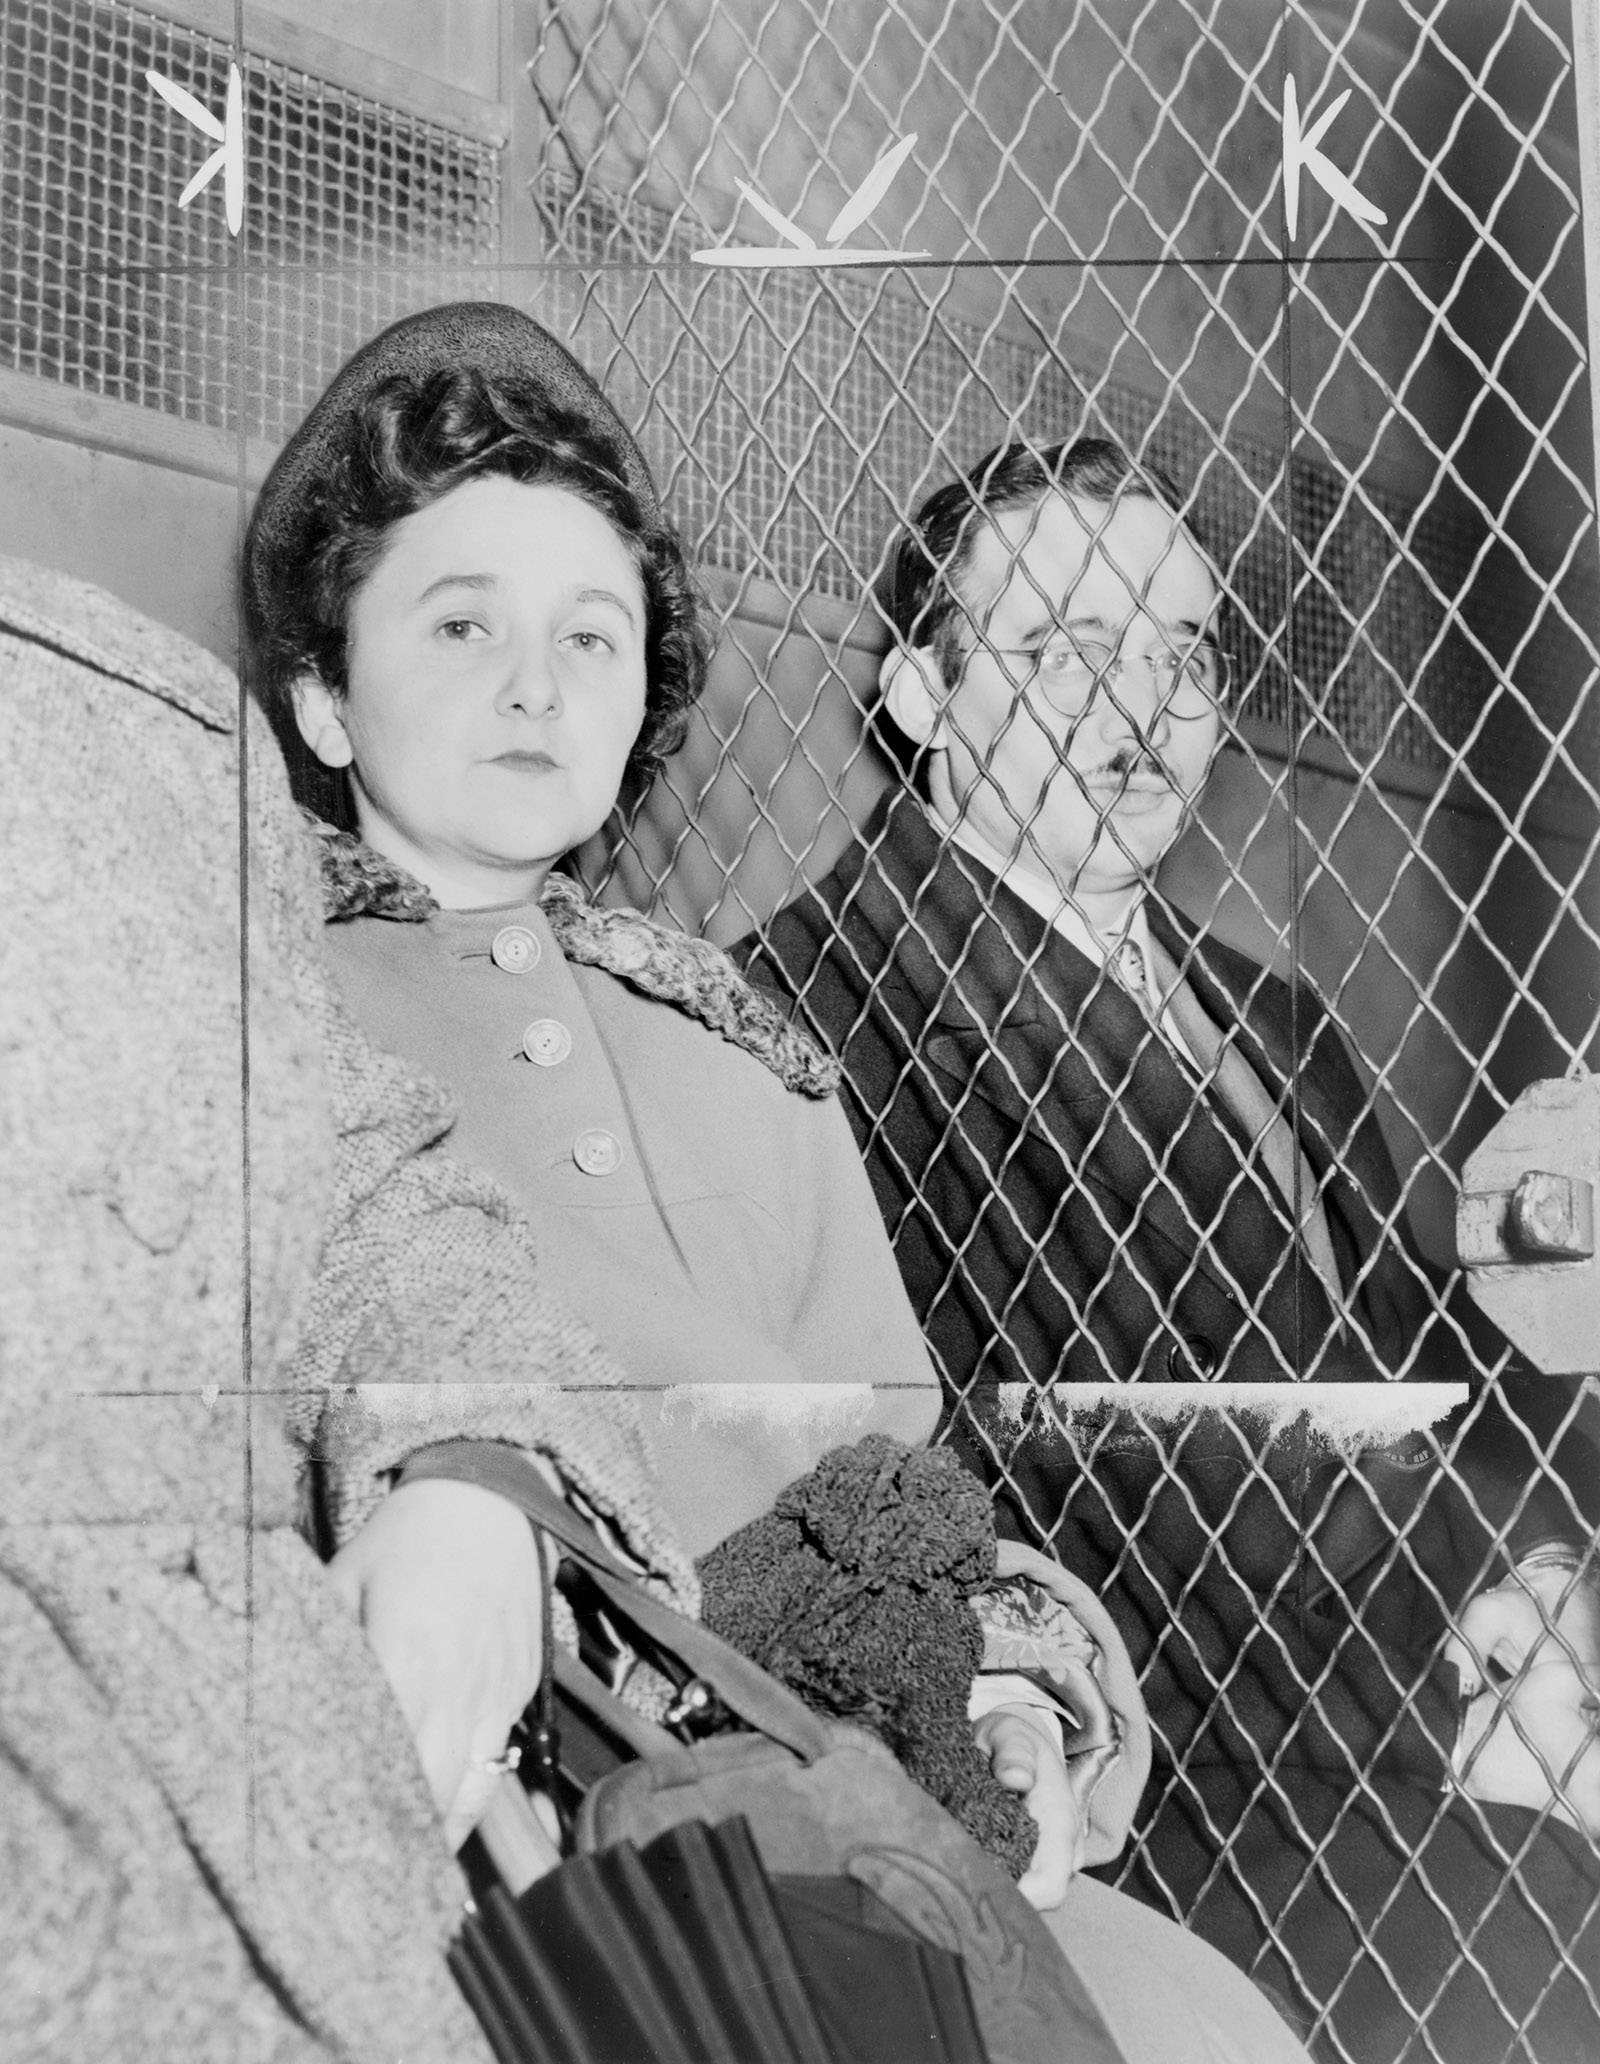 Ethel and Julius Rosenberg leaving the courthouse in a prison van after being found guilty of conspiracy to commit espionage